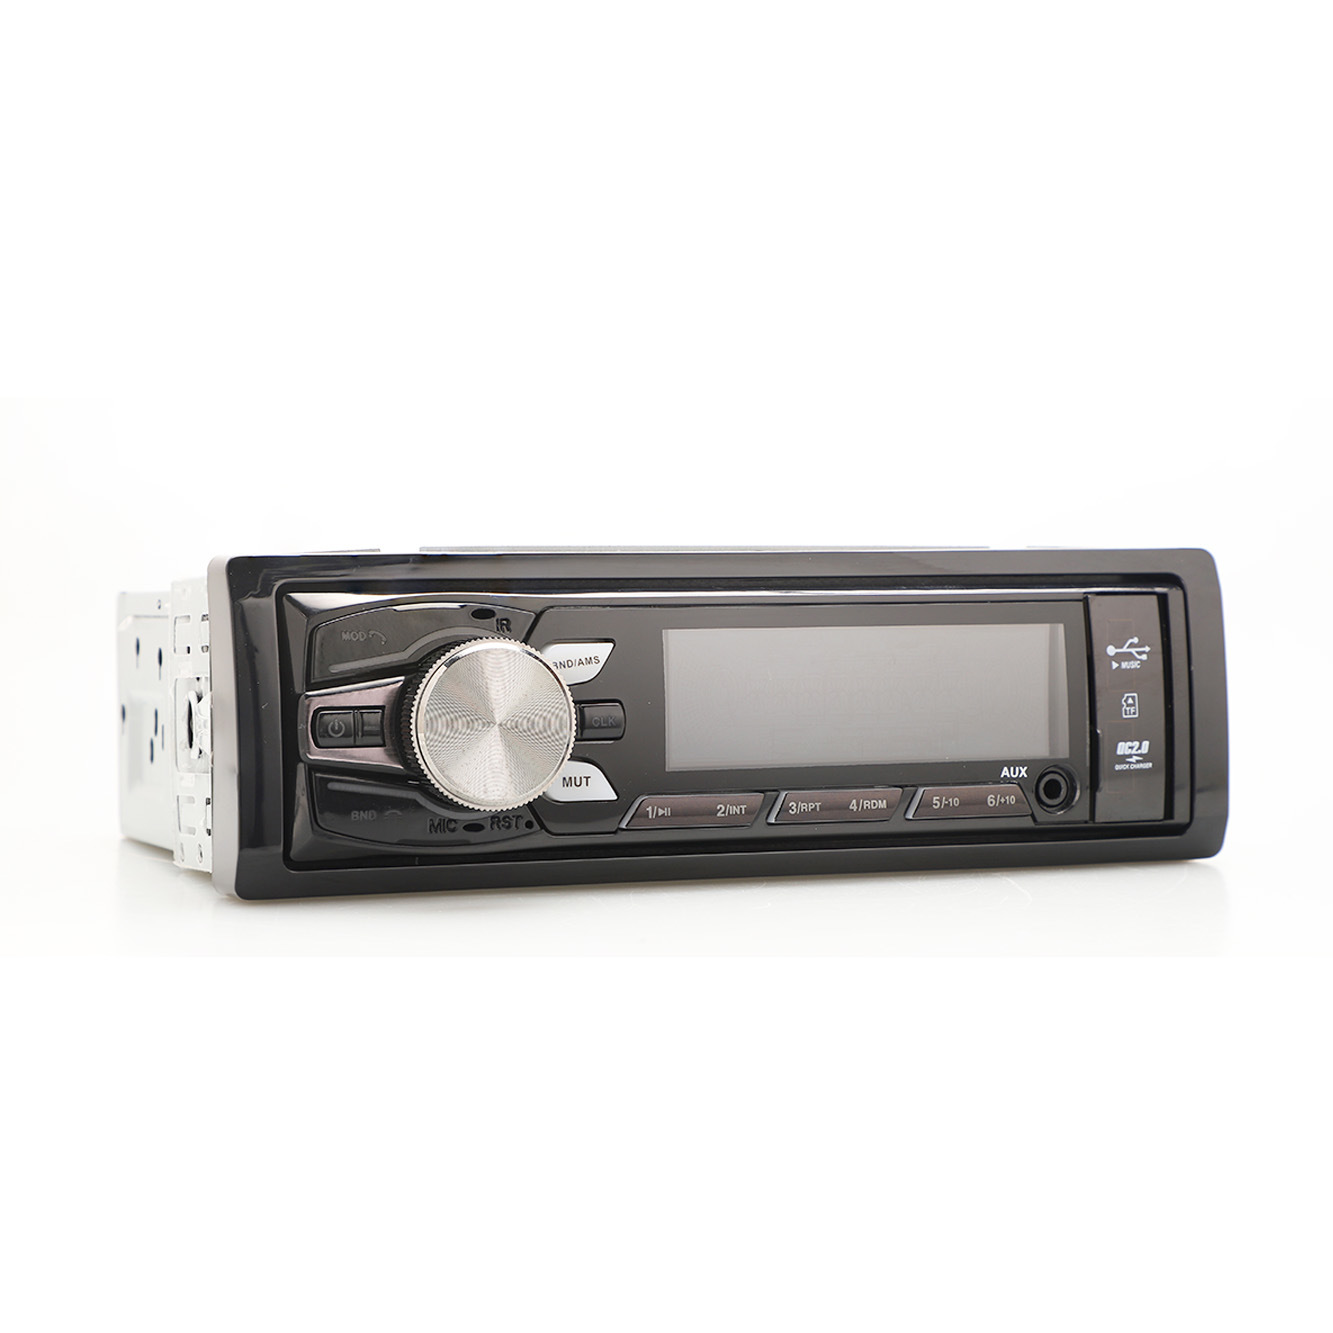 Auto Car MP3 Player MP3 Player To Car Stereo Car MP3 Player Auto Audio Mutil-Color Car MP3 Radio with Blueooth